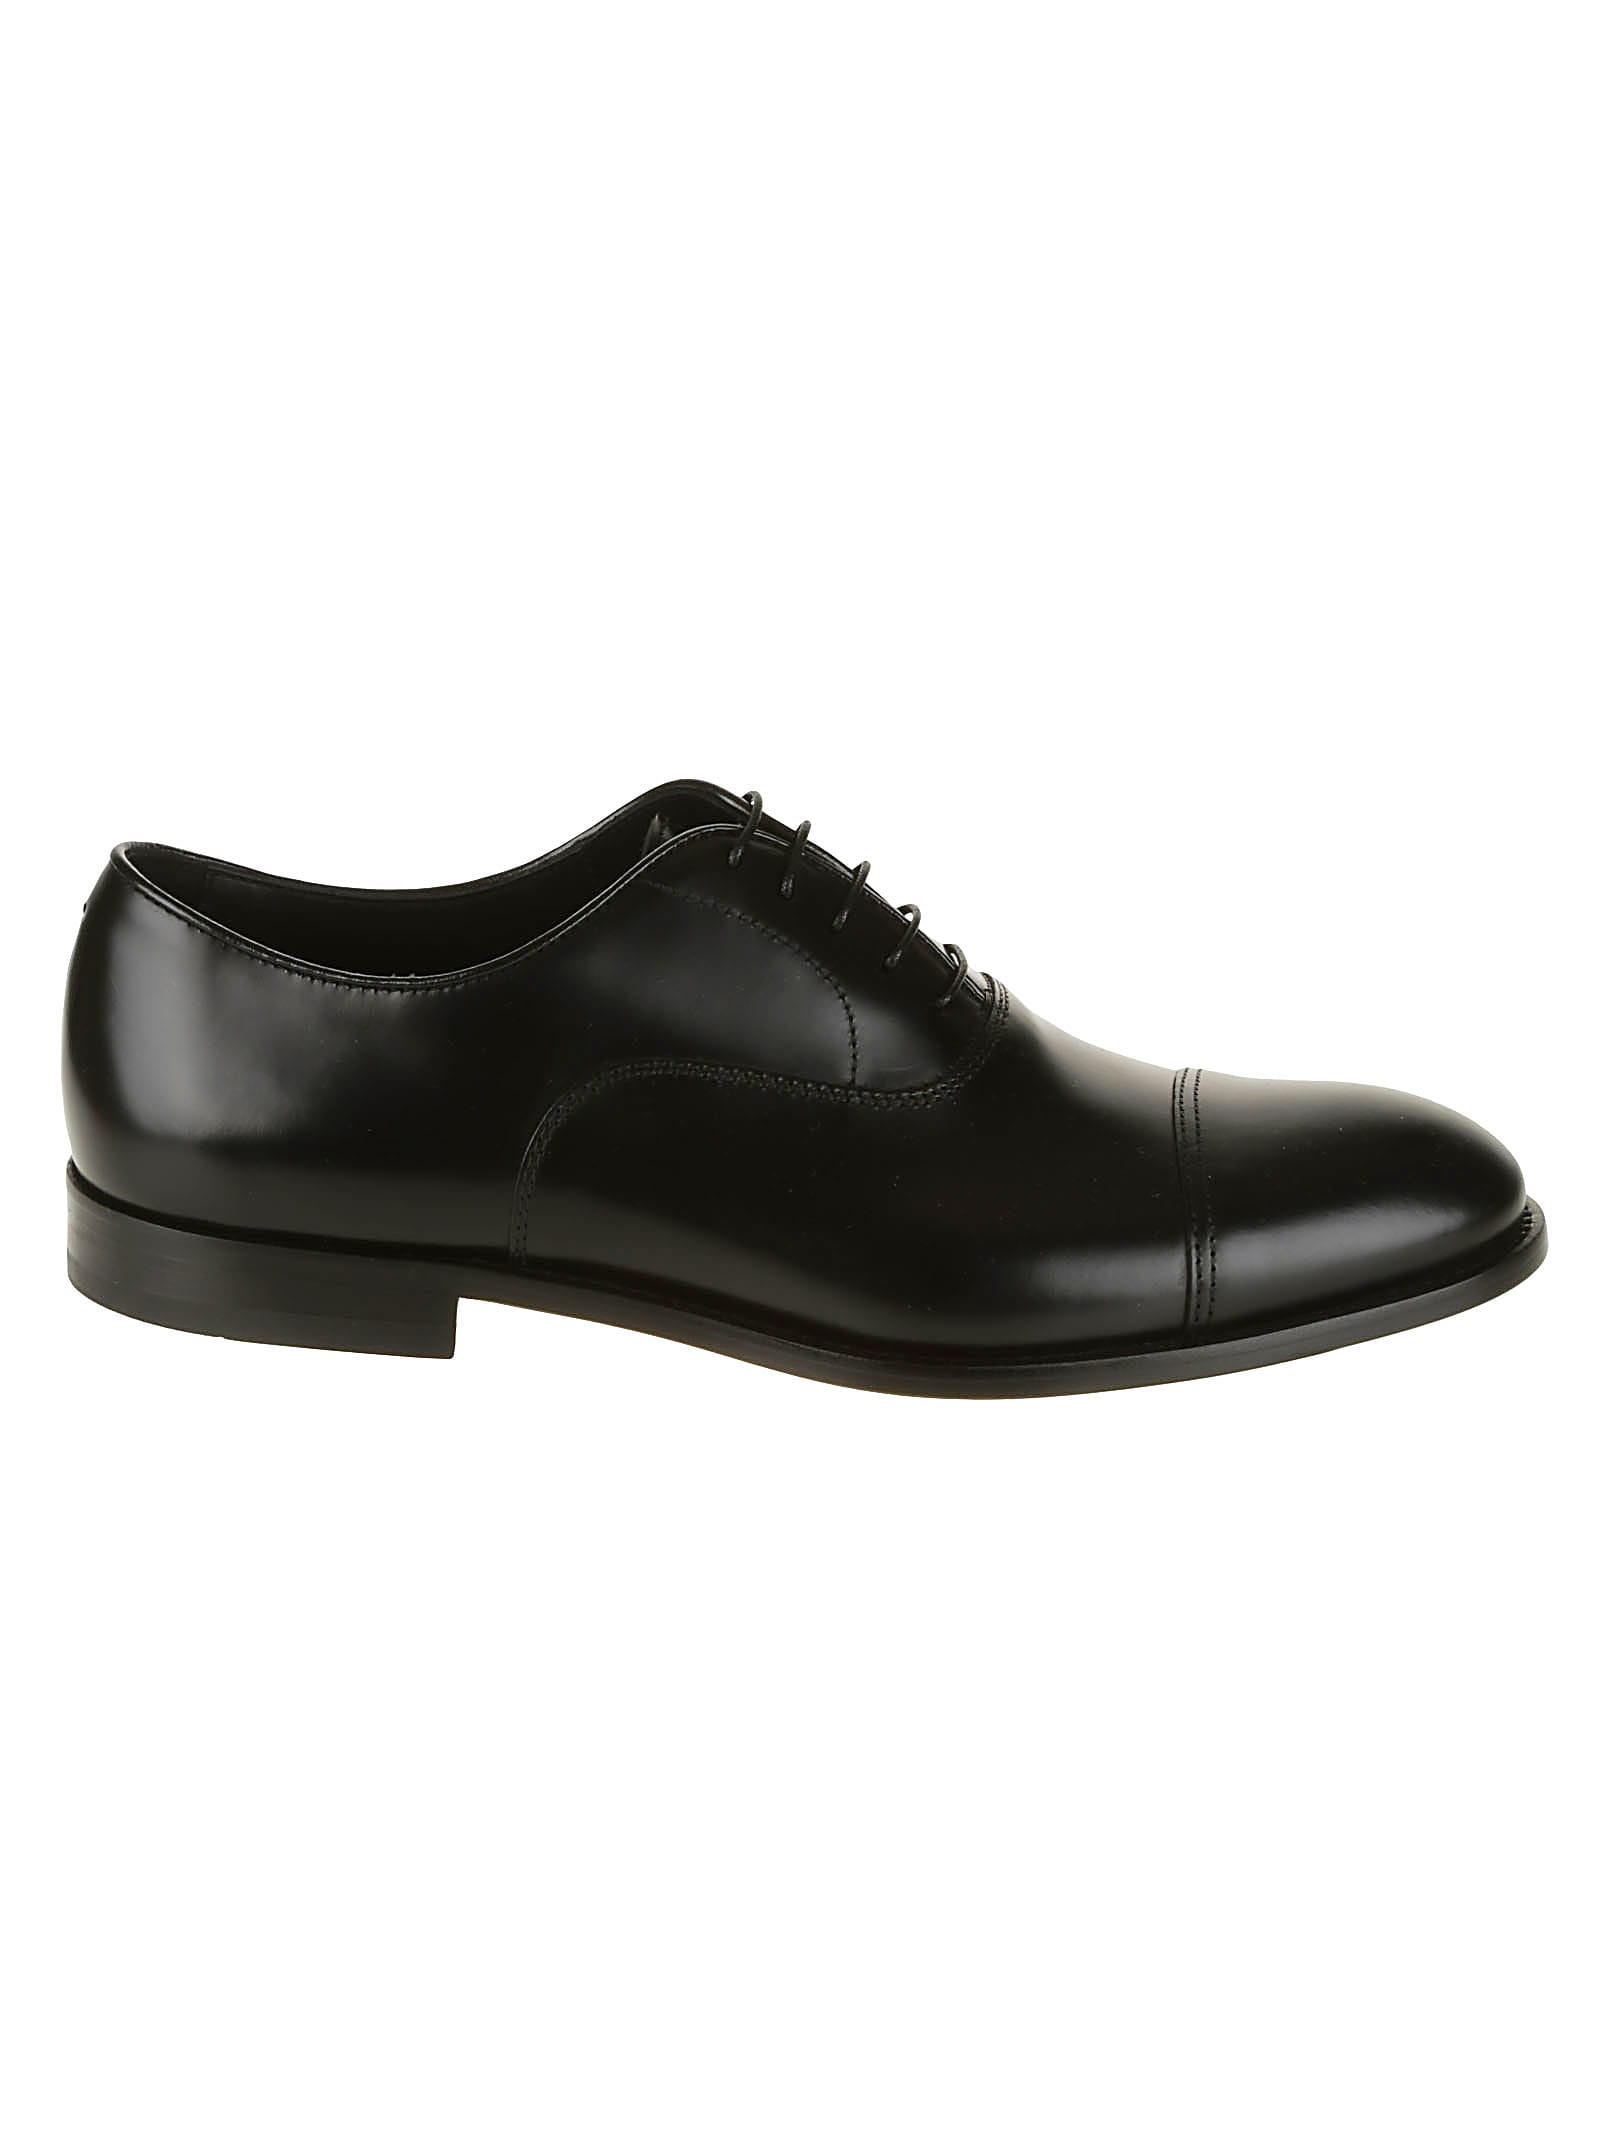 Doucal's Classic Oxford Shoes In Black